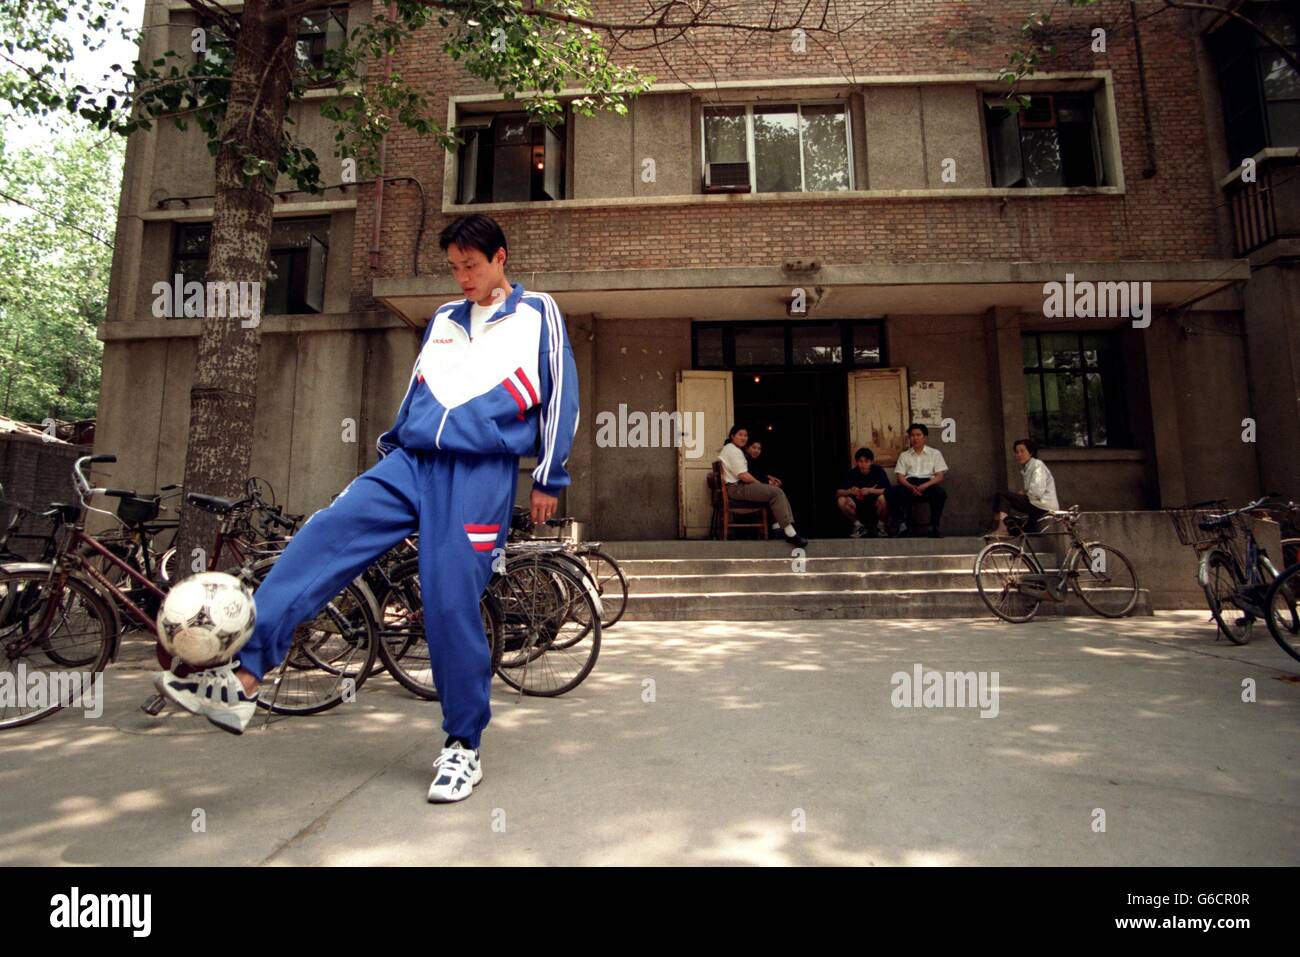 22-MAY-96 ... England Football Tour to China ... Chinese National Team member Fan Zhiyi shows off his skills in front of the players lodge in Beijing ... Picture by Laurence Griffiths/EMPICS Stock Photo